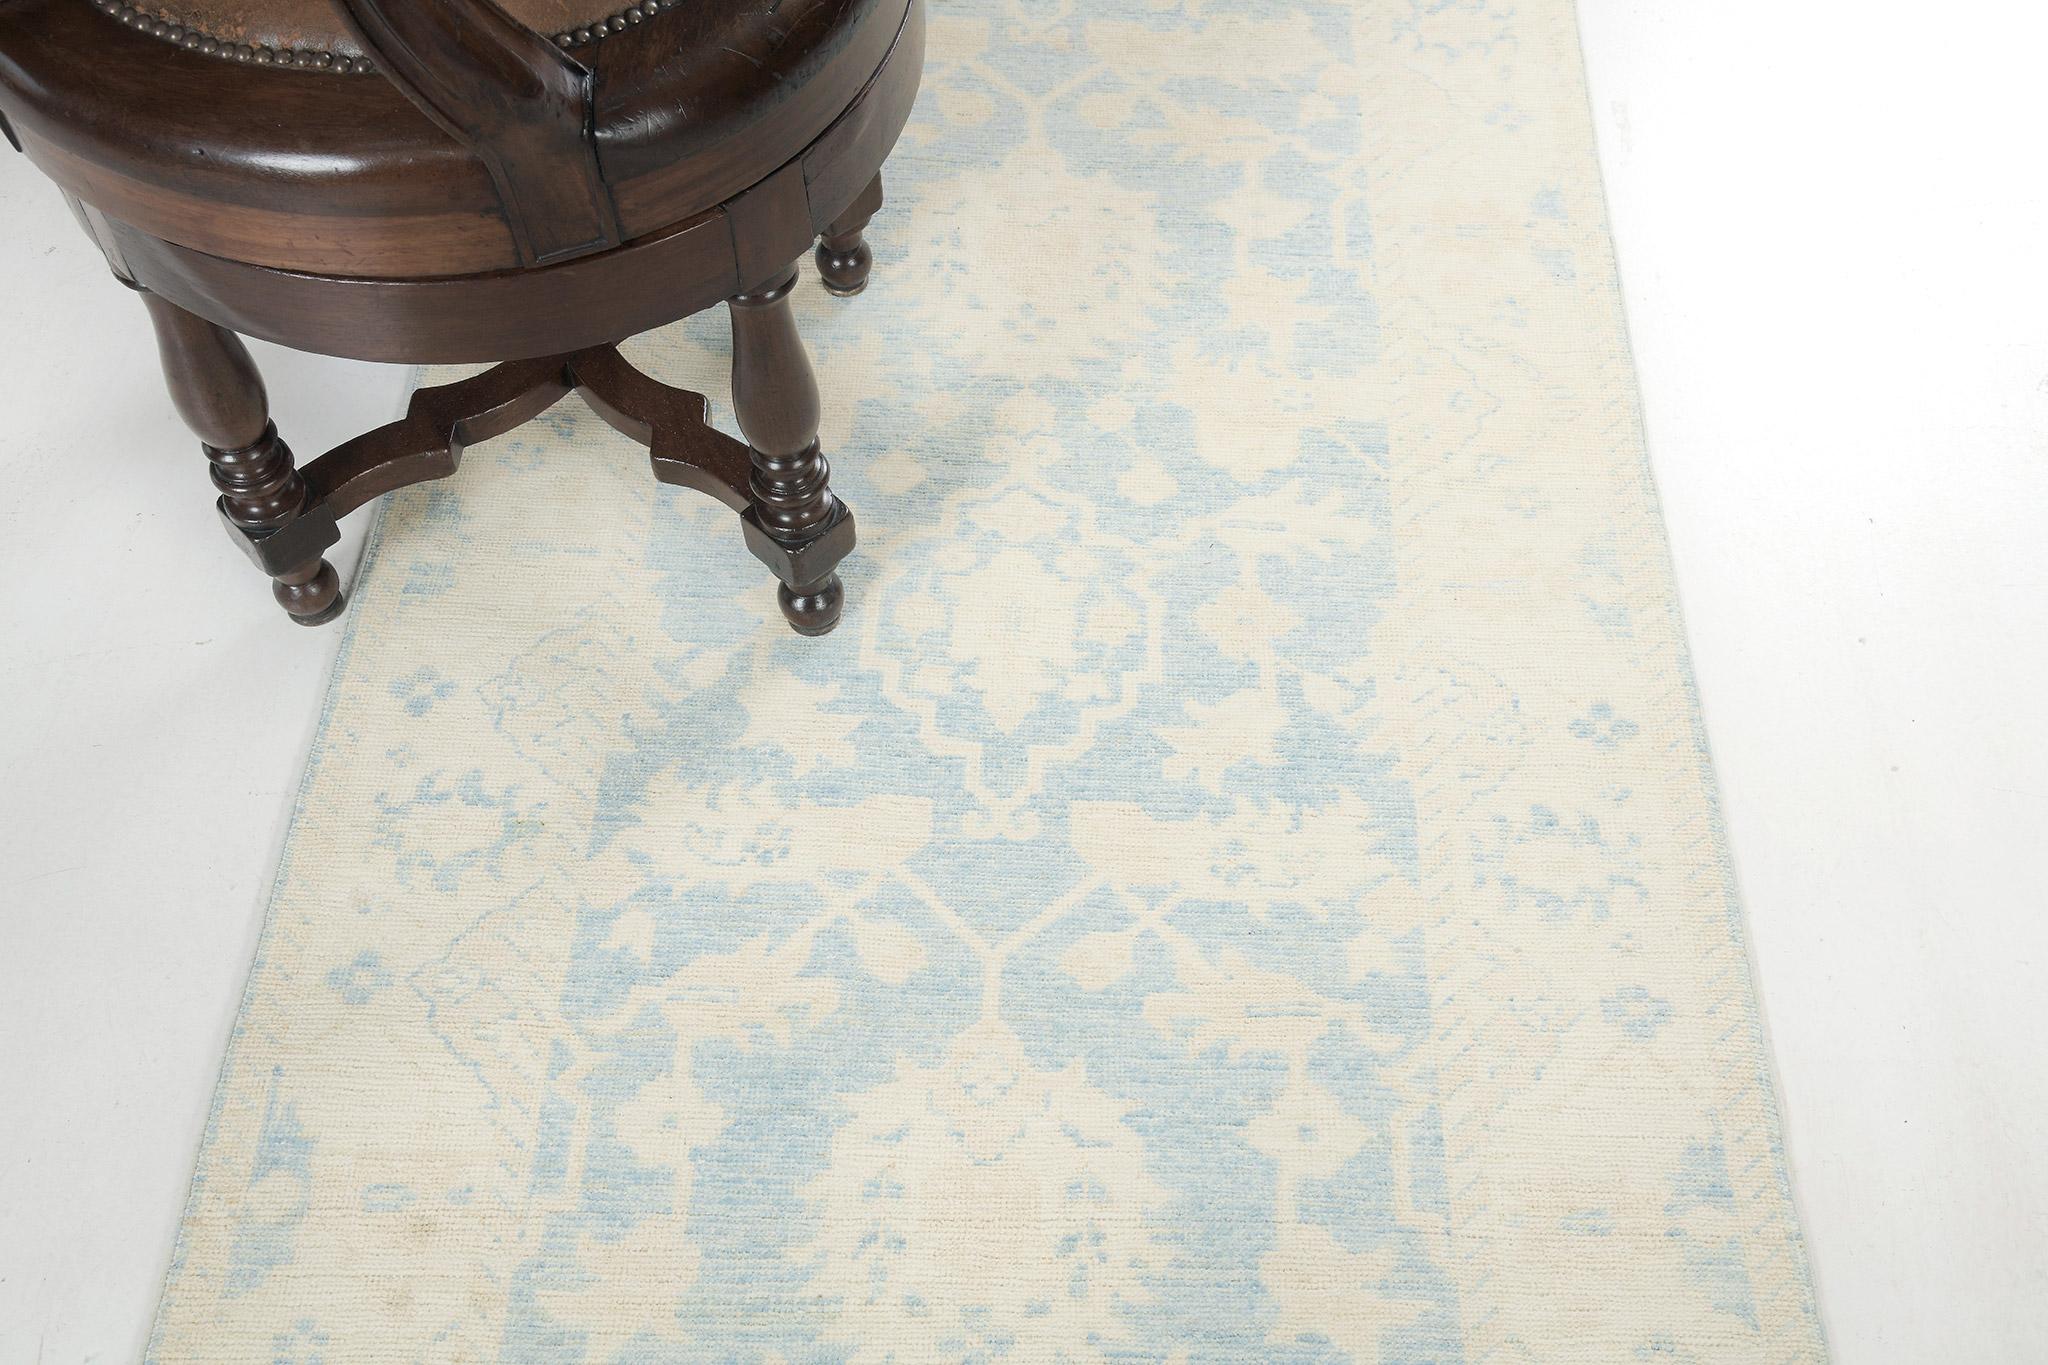 Incredible vines are fascinated with various embellishments and symbolic elements in a neutral tone and gold accents in the cerulean blue field and are featured together with stunning borders that make the rug more charming. This will be an